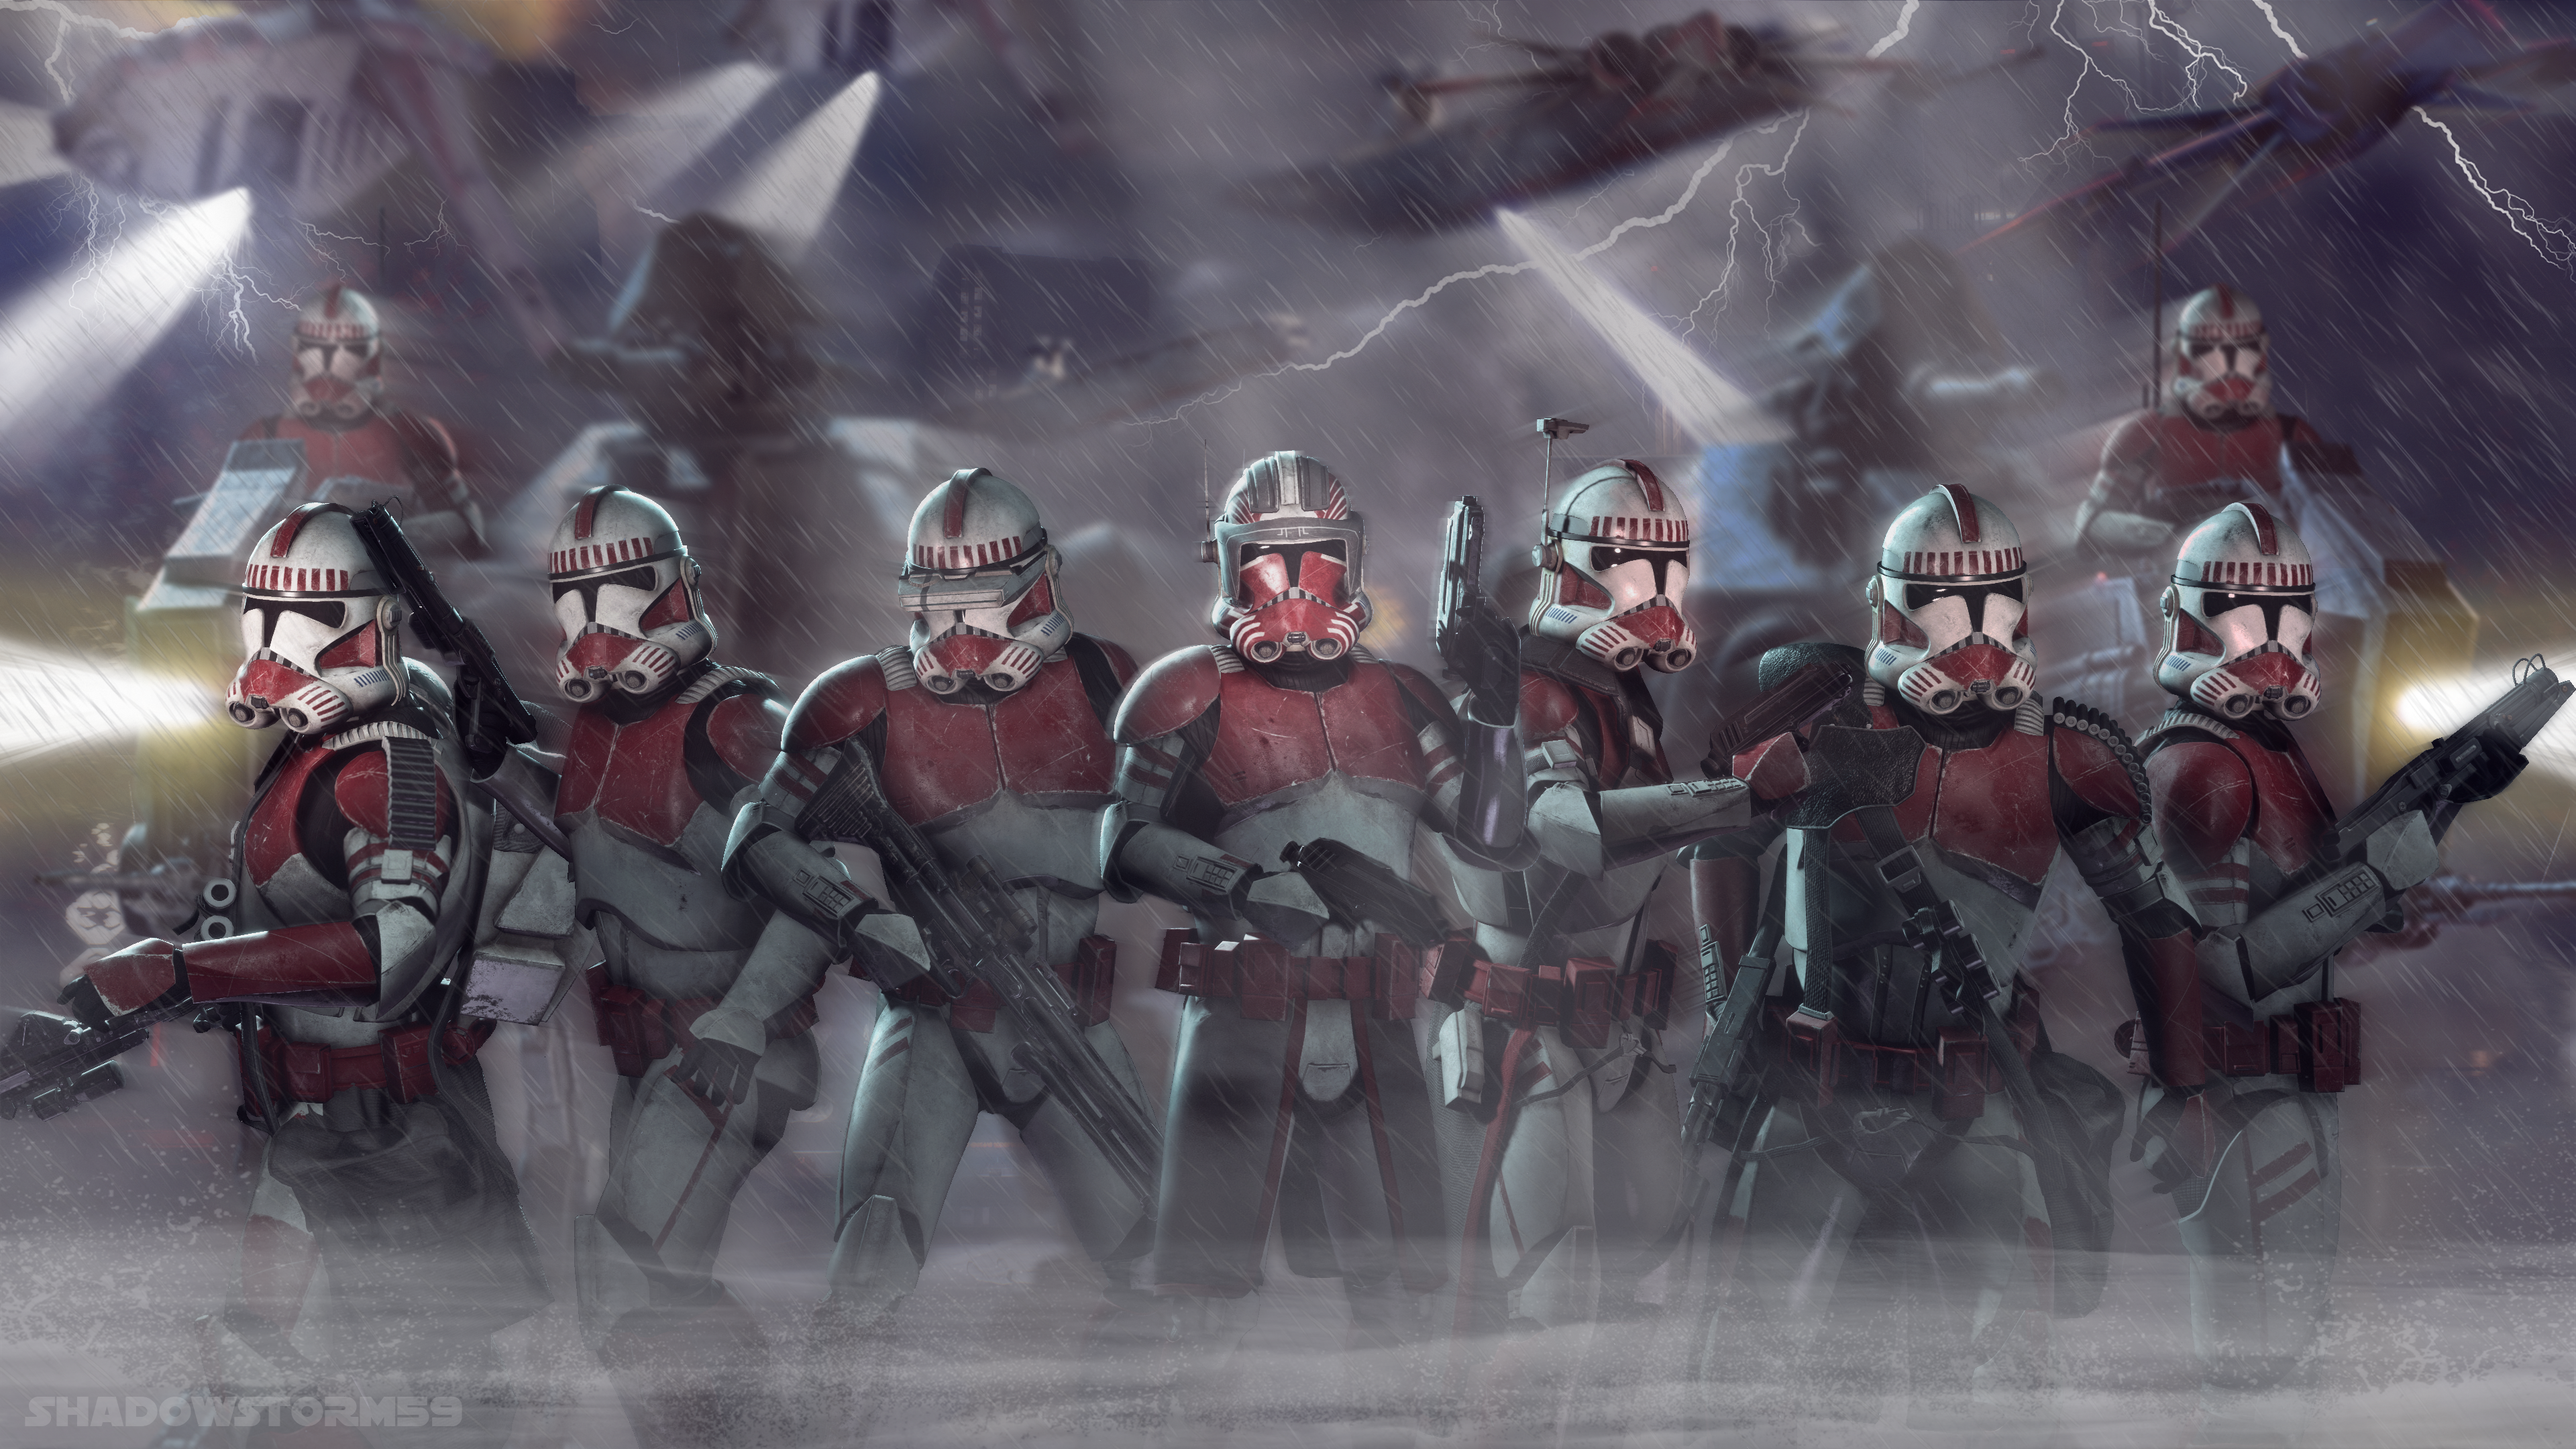 The Coruscant Guard Choc Troopers 4k Wallpaper